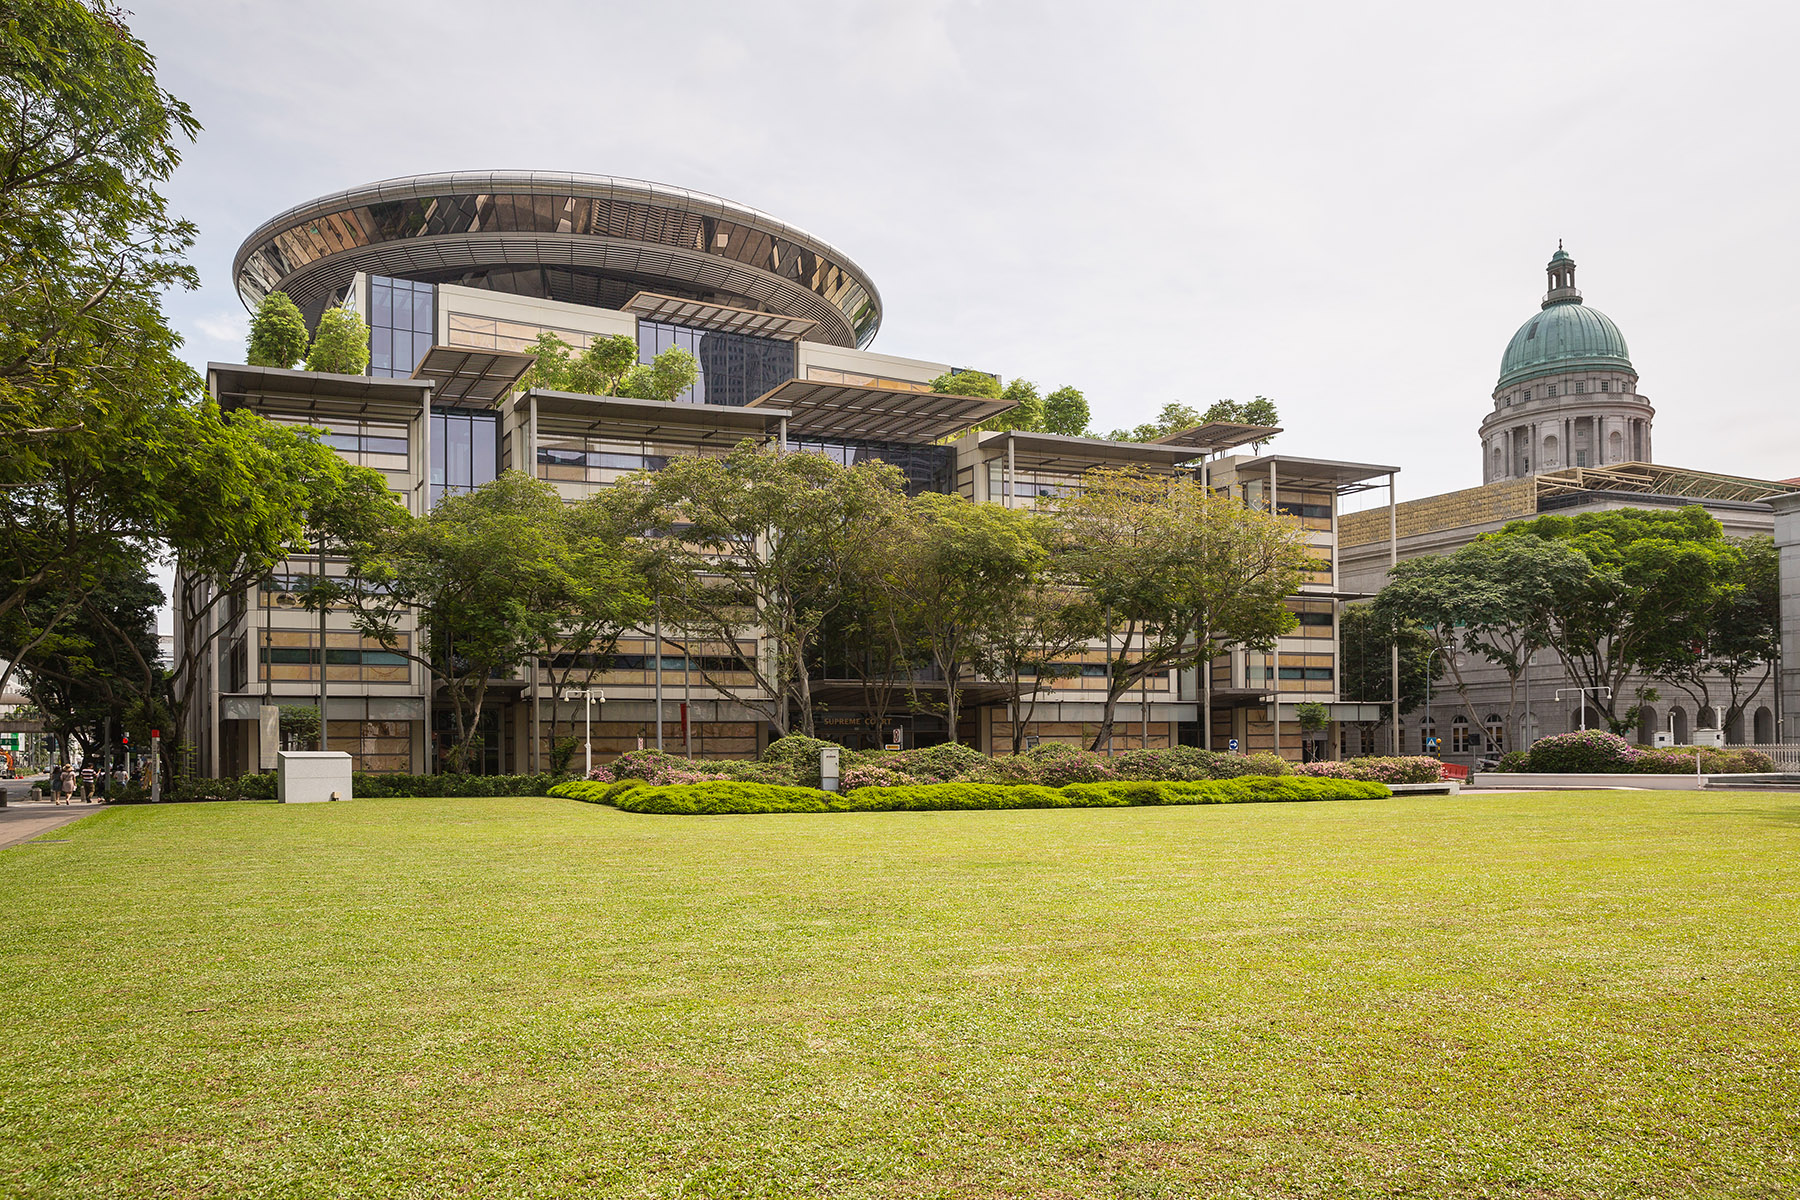 The Supreme Court of Singapore building with green lawns